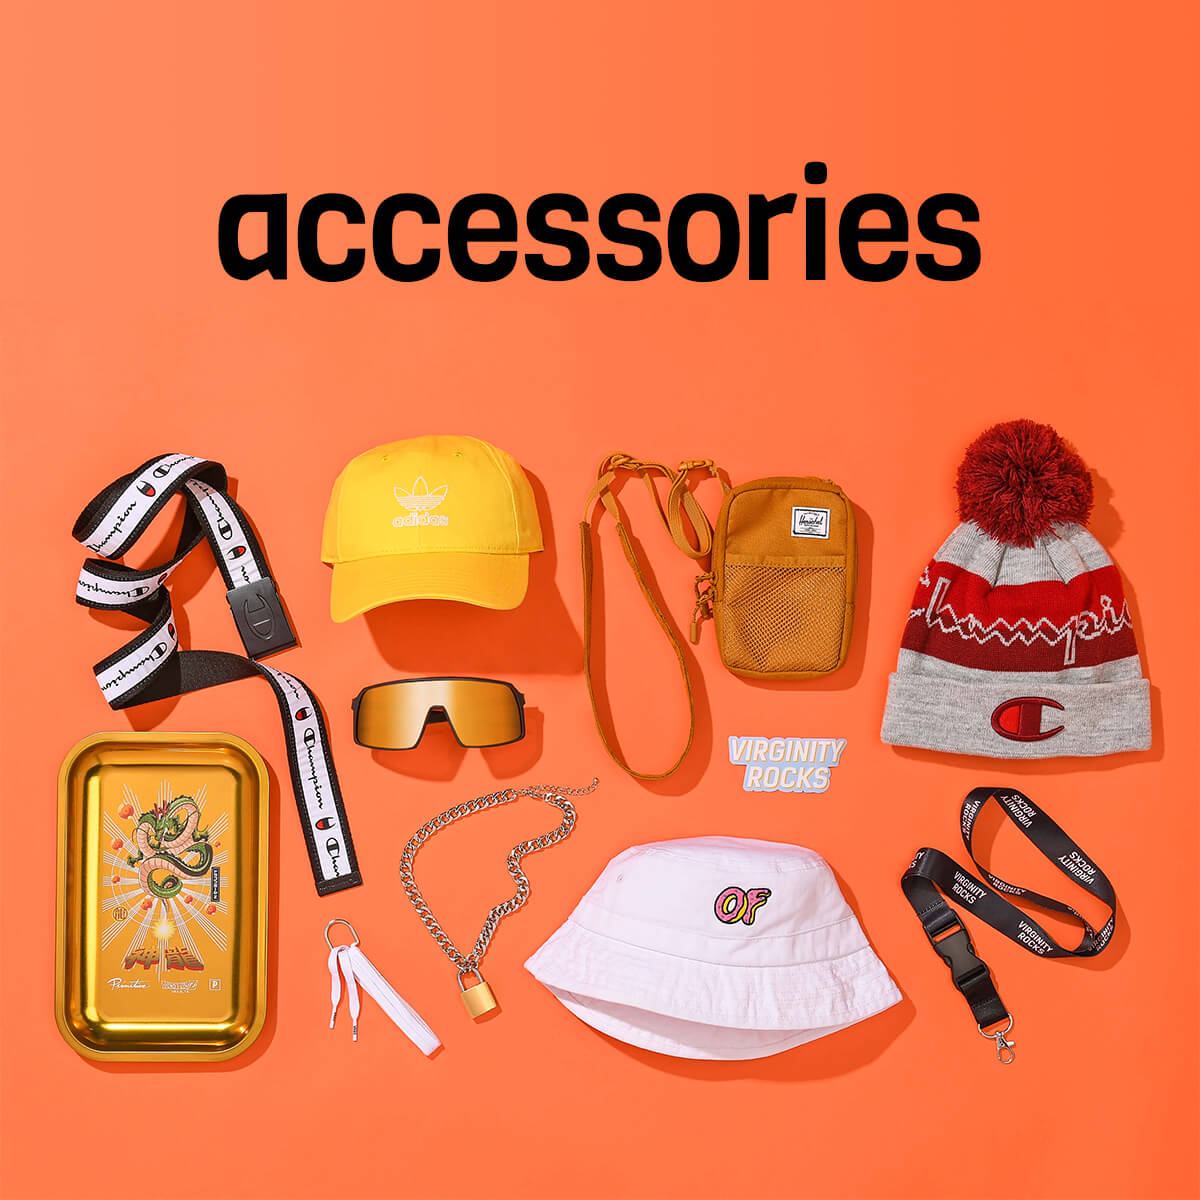 ACCESSORY GIFTS